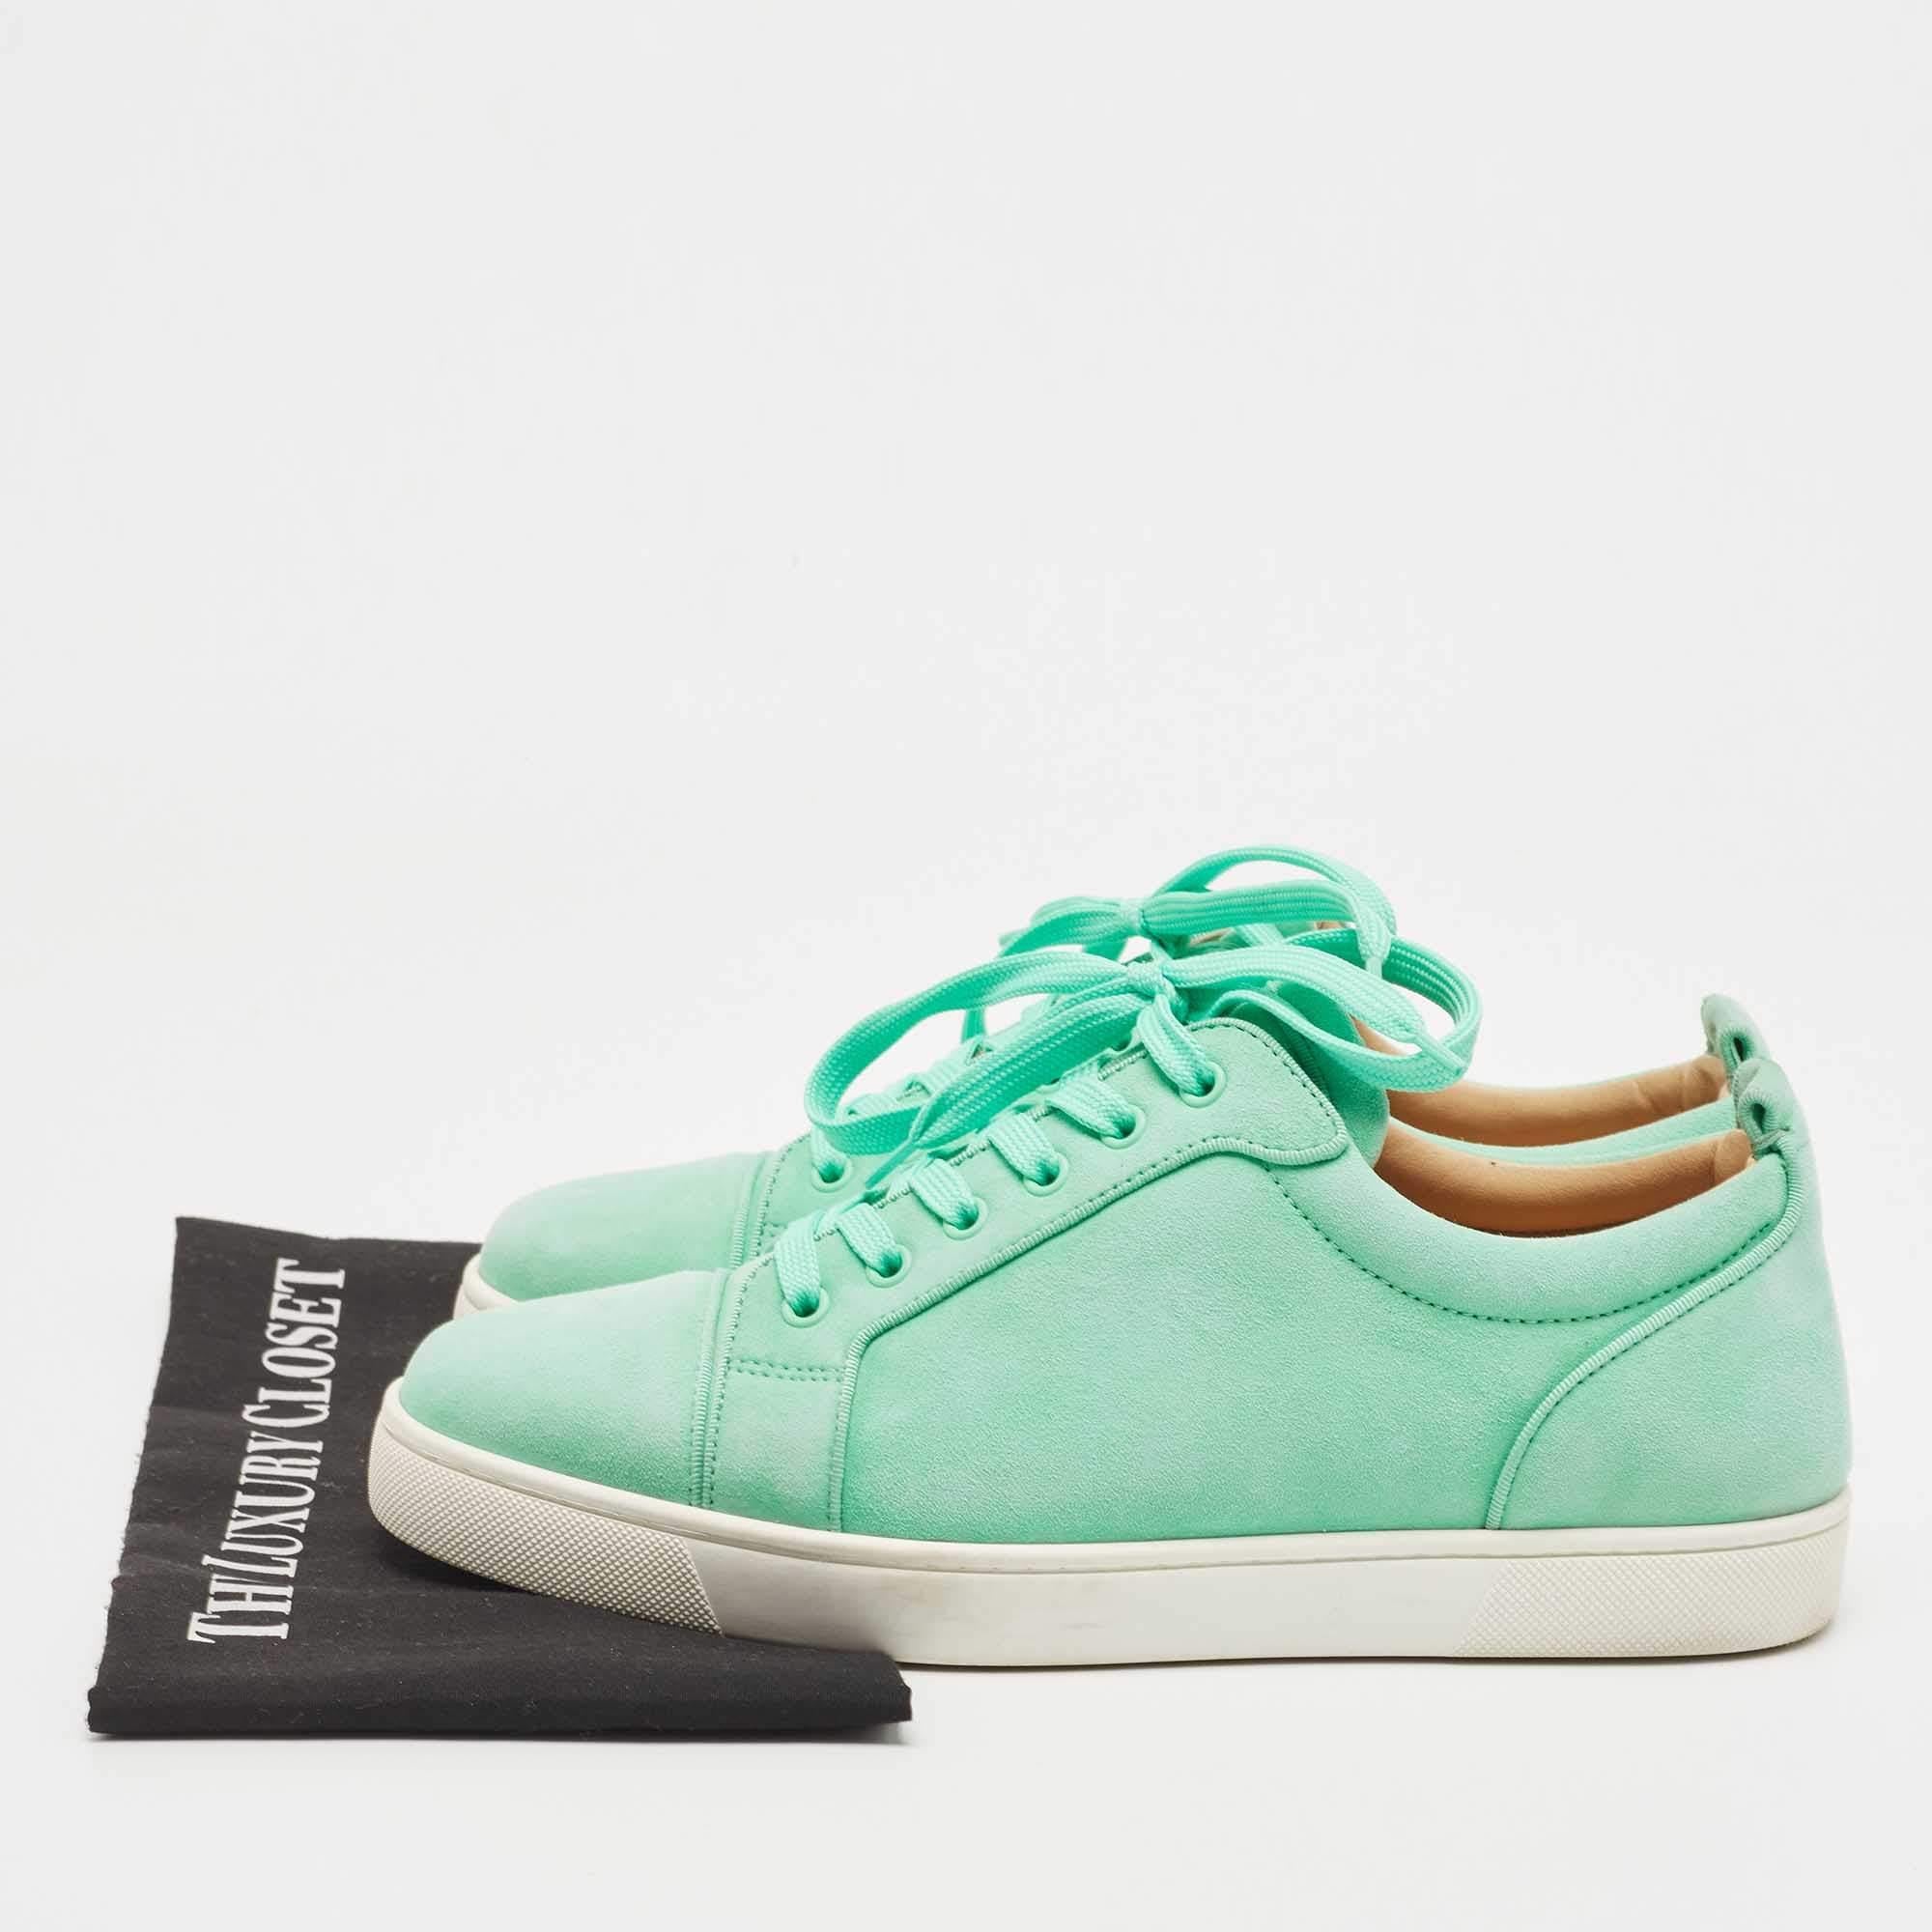 Christian Louboutin green Suede Rantulow Low Top Sneakers For Sale 4